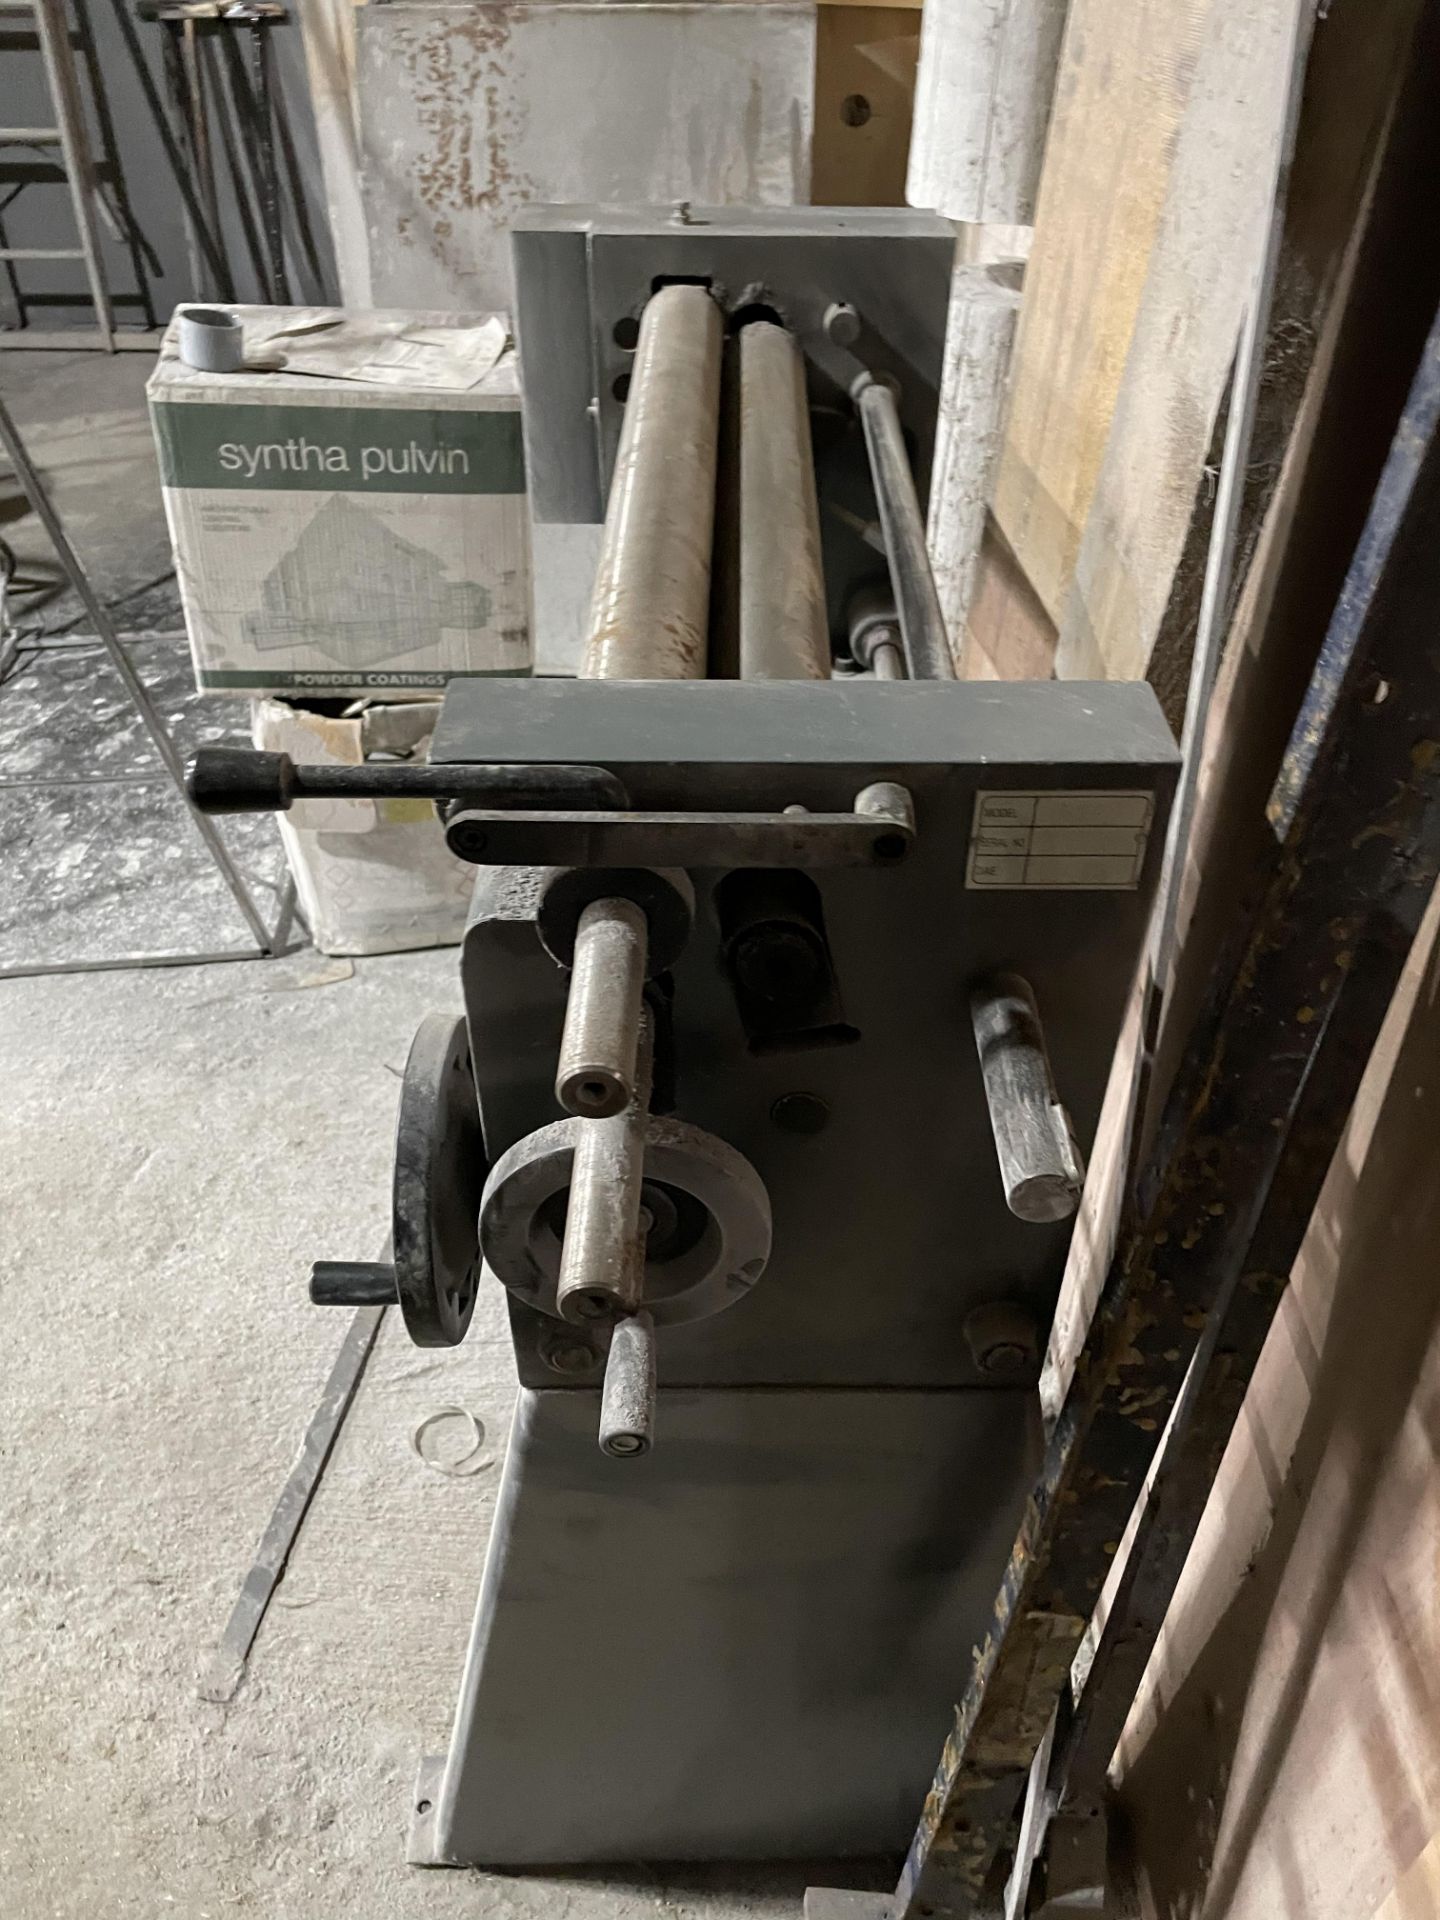 WNS Hand Bending Rolls BR610/60 - Serial Number. 201802009 - Date 02/2018, c/w hand crank. - Image 2 of 5